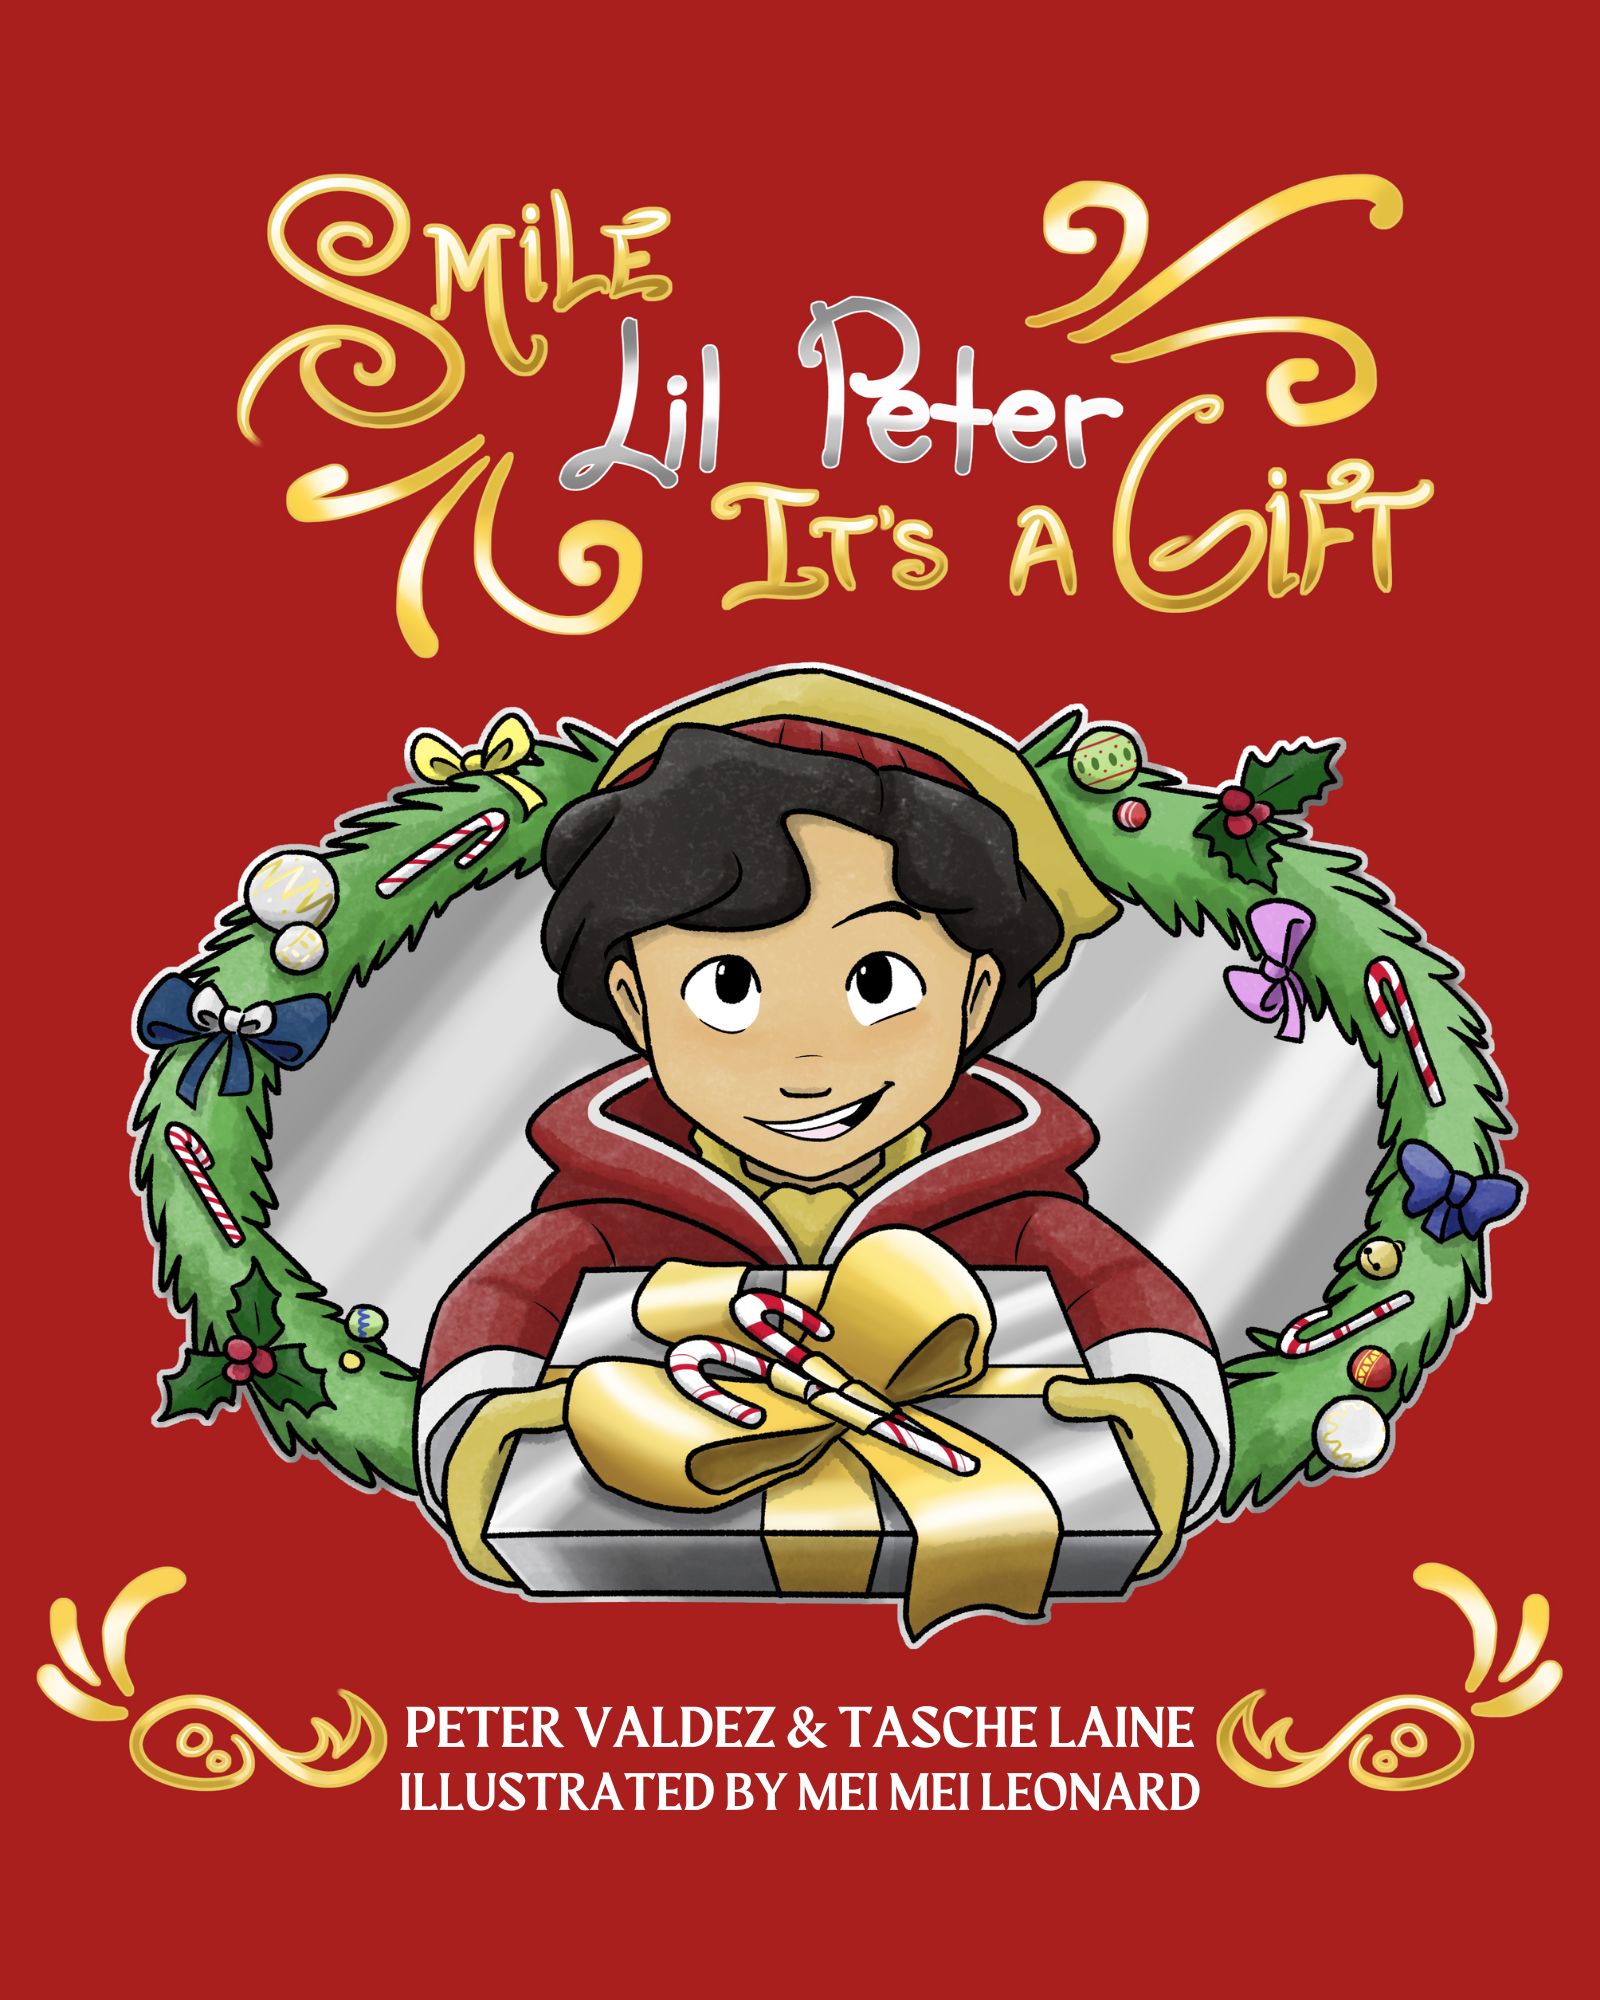 Smile Lil Peter It's A Gift Tasche Laine Book Cover